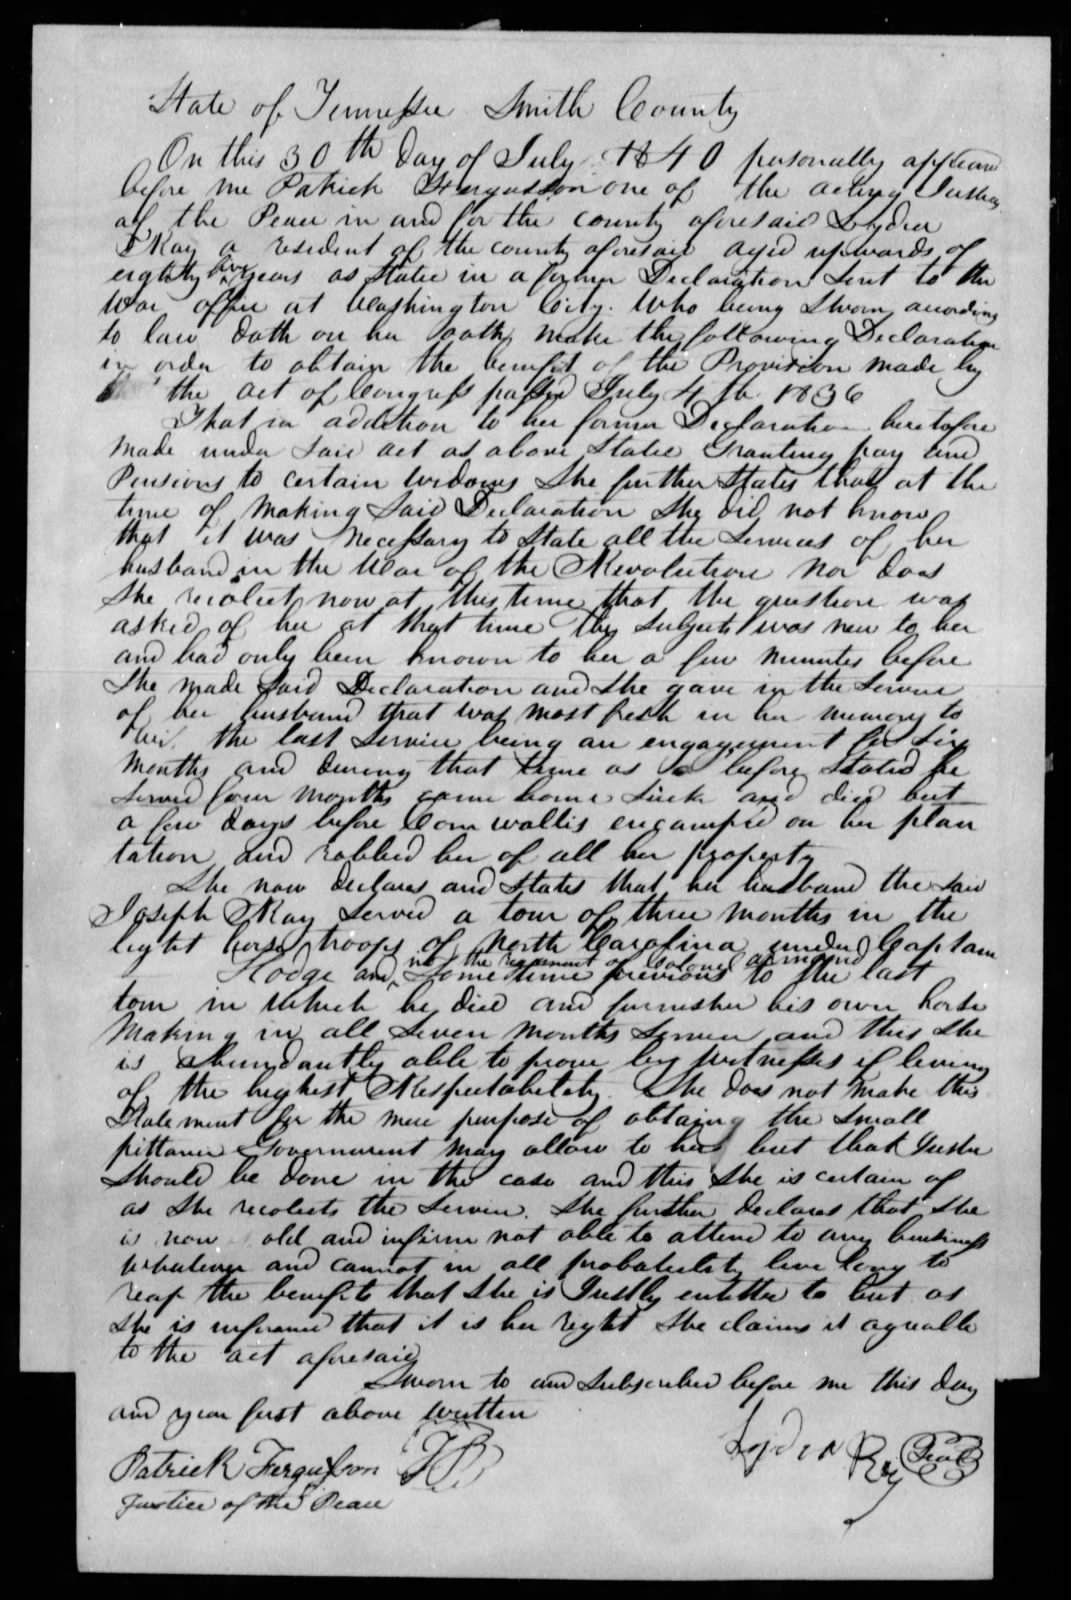 Application for a Widow's Pension from Lydia Ray, 30 July 1840, page 1